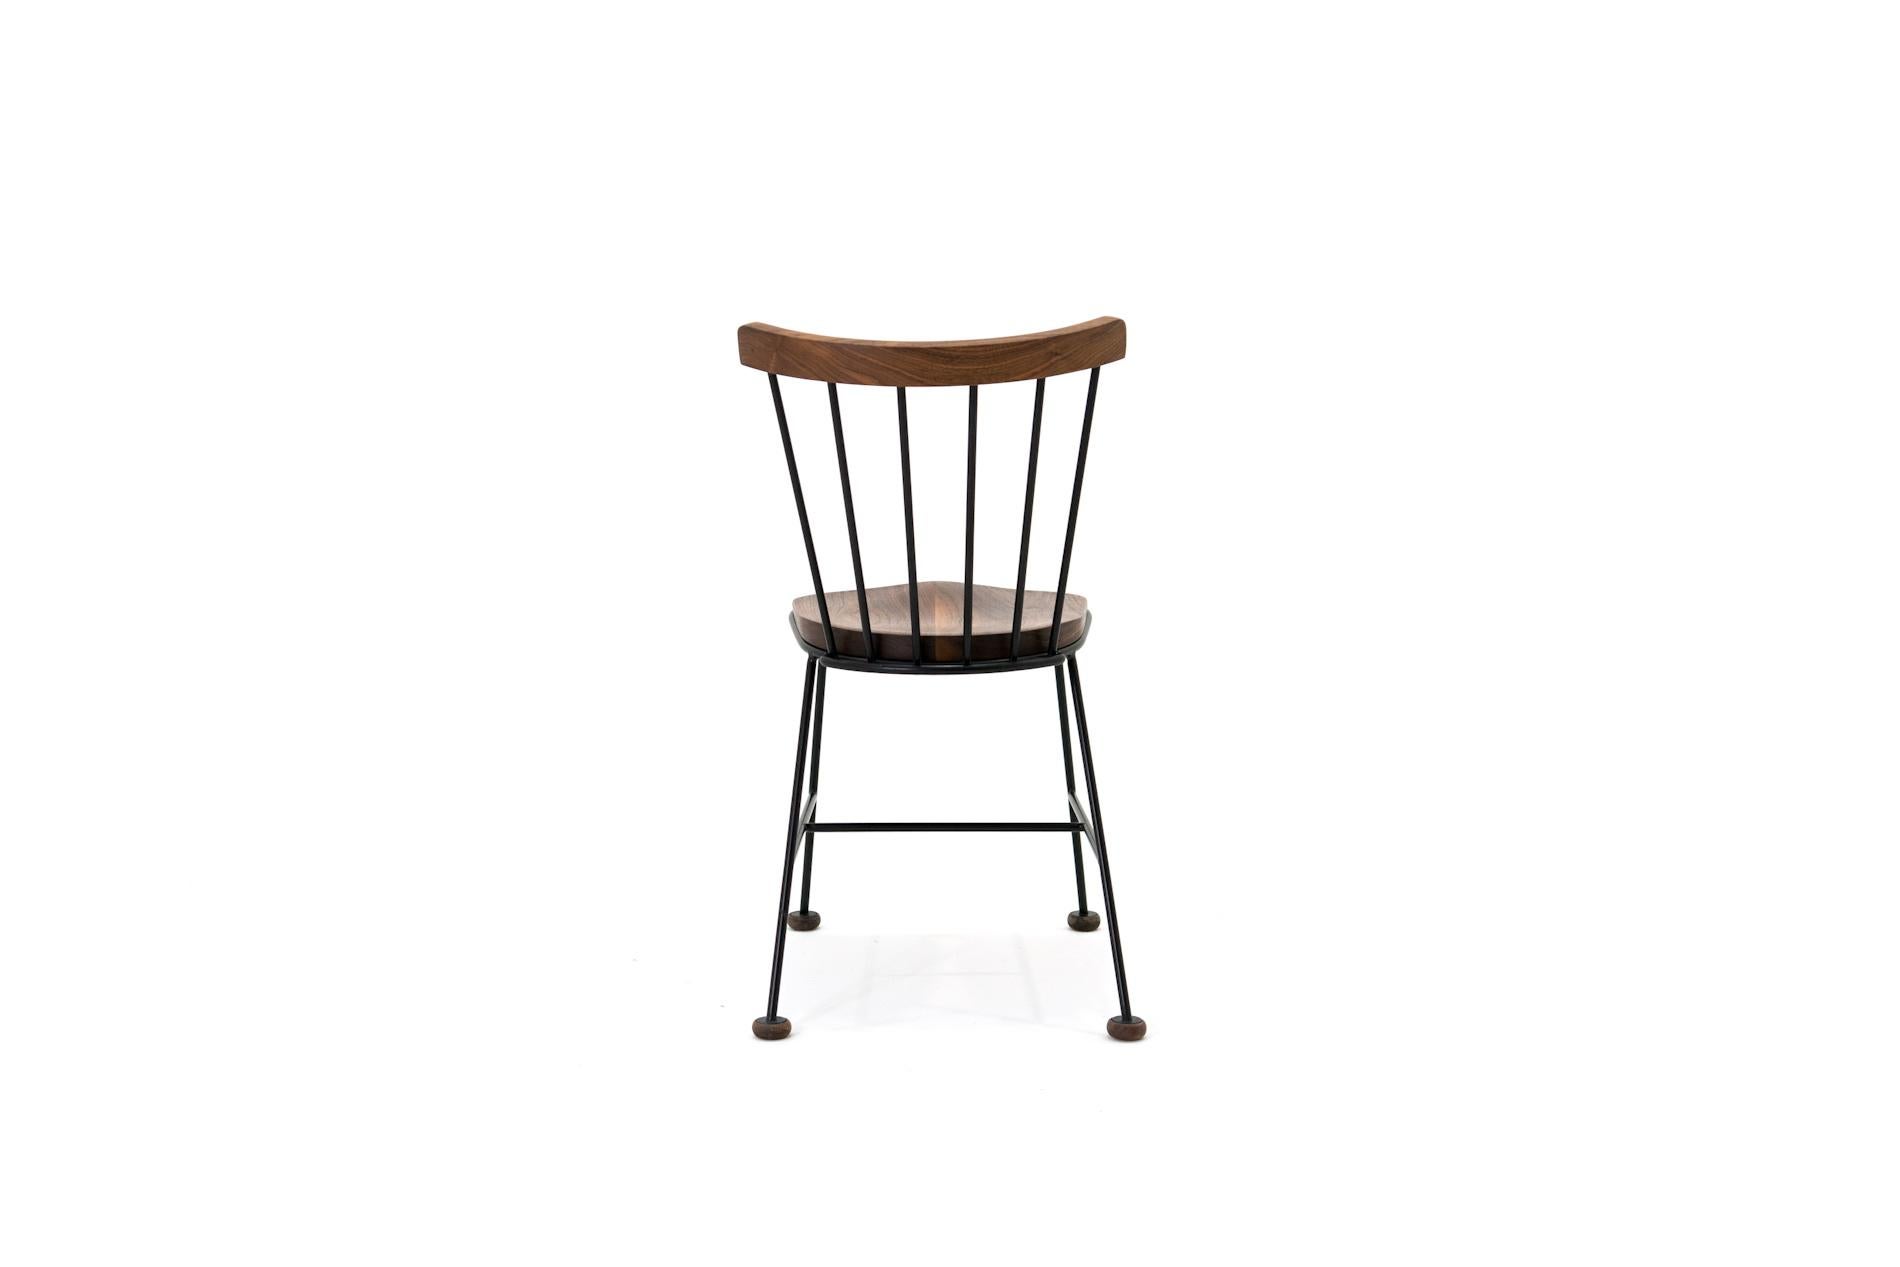 Minimalist Mw Chair 01 Retro Inspired Chair in Shaped Walnut and Solid Steel Frame For Sale